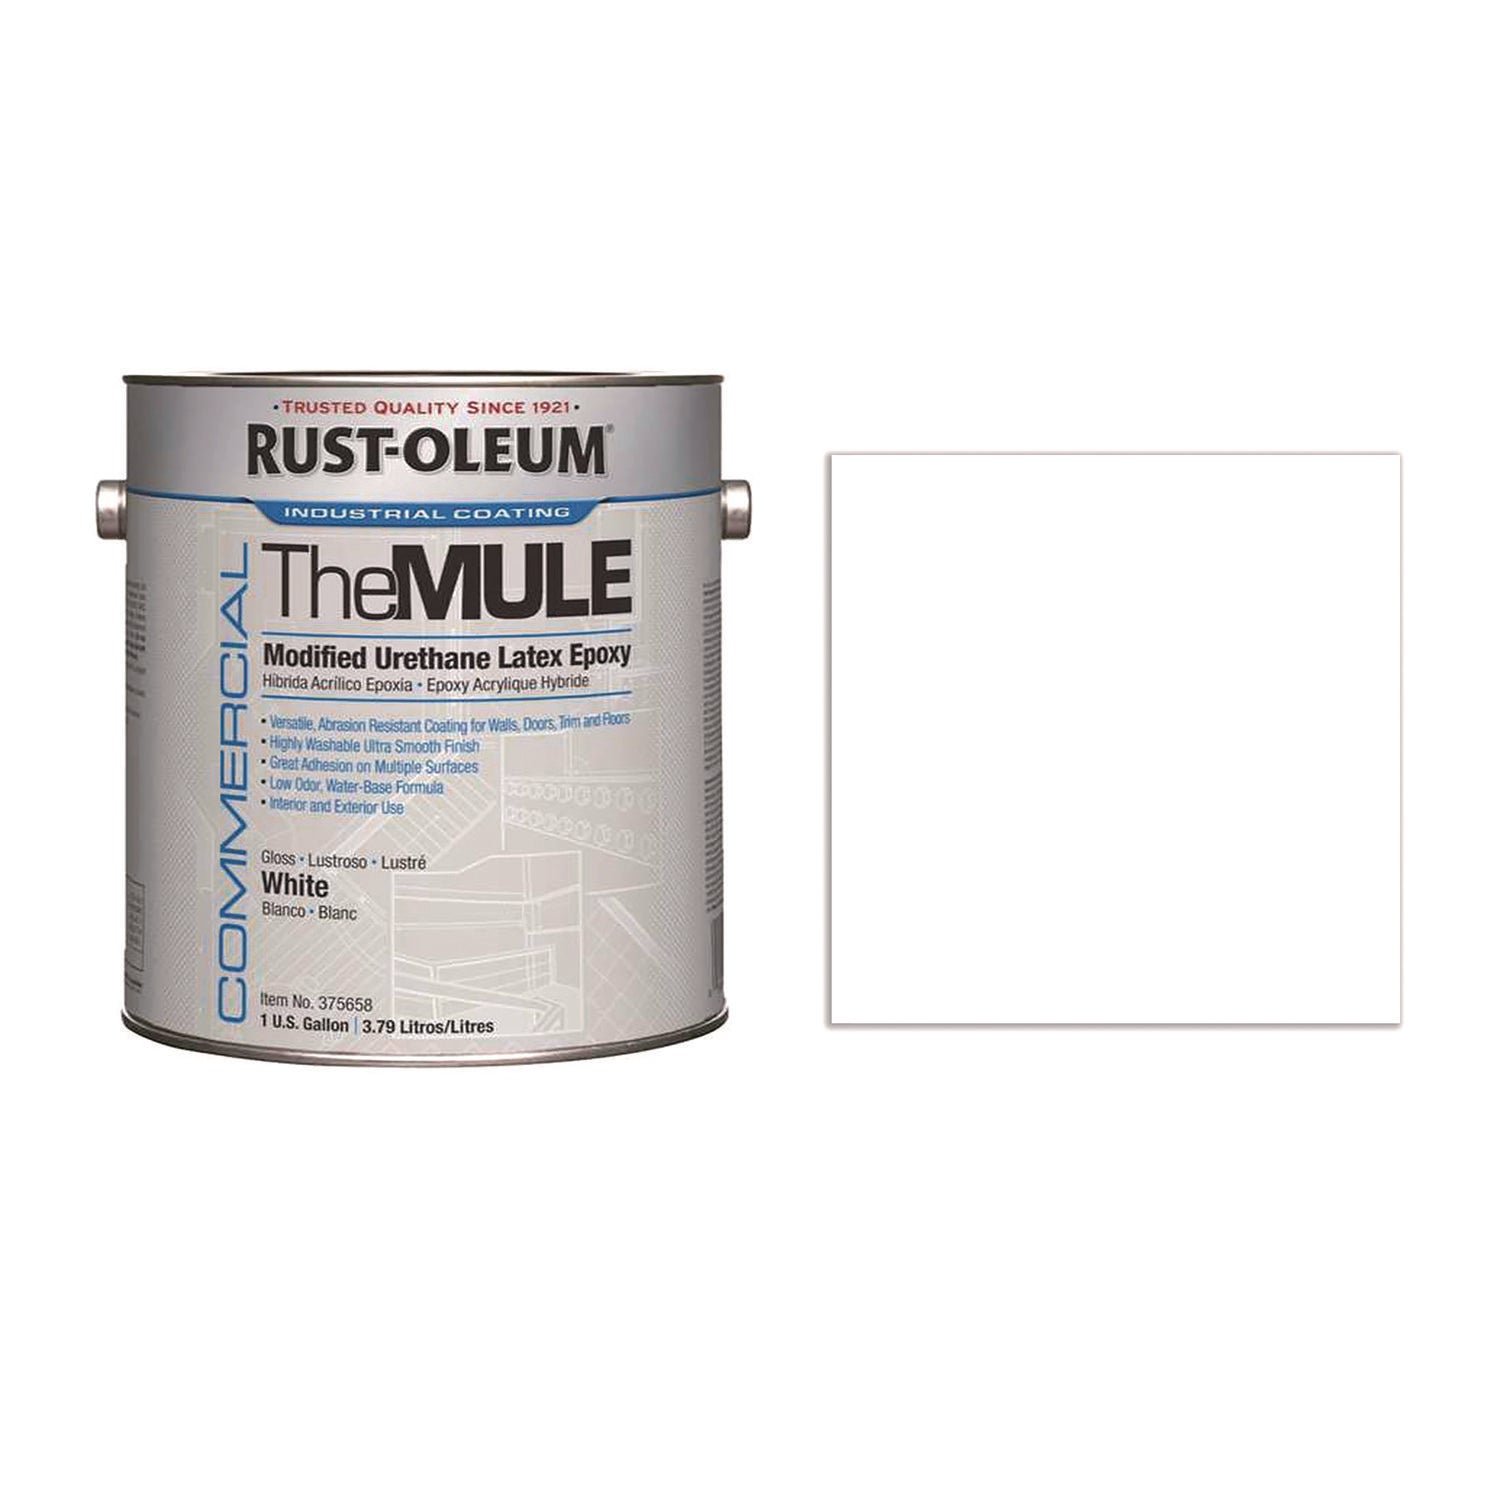 commercial-the-mule-modified-urethane-latex-epoxy-interior-exterior-gloss-glass-white-1-gal-bucket-pail-2-carton_rst375658 - 2